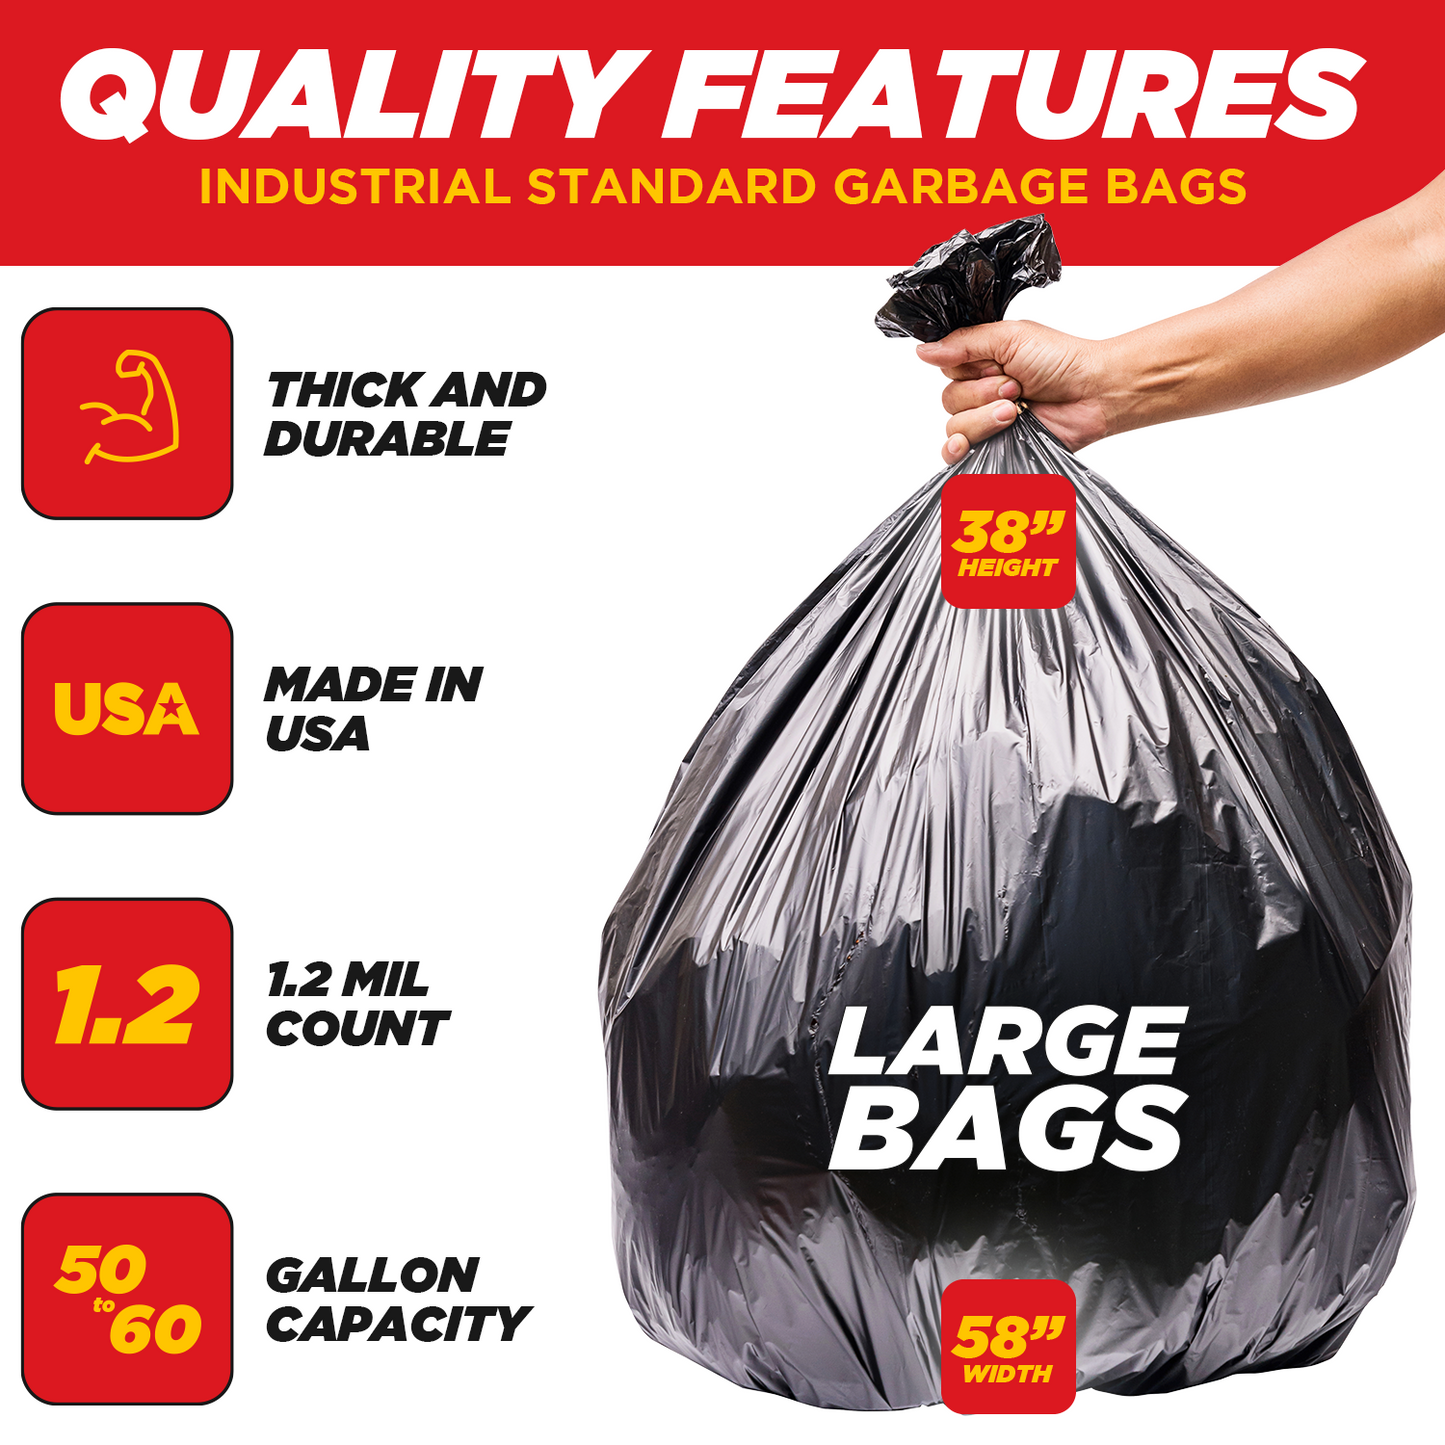 Dyno Products Online 65 Gallon Heavy Duty Trash Bags, 1.5 Mil Thickness, 25 Count, Black, Industrial Waste